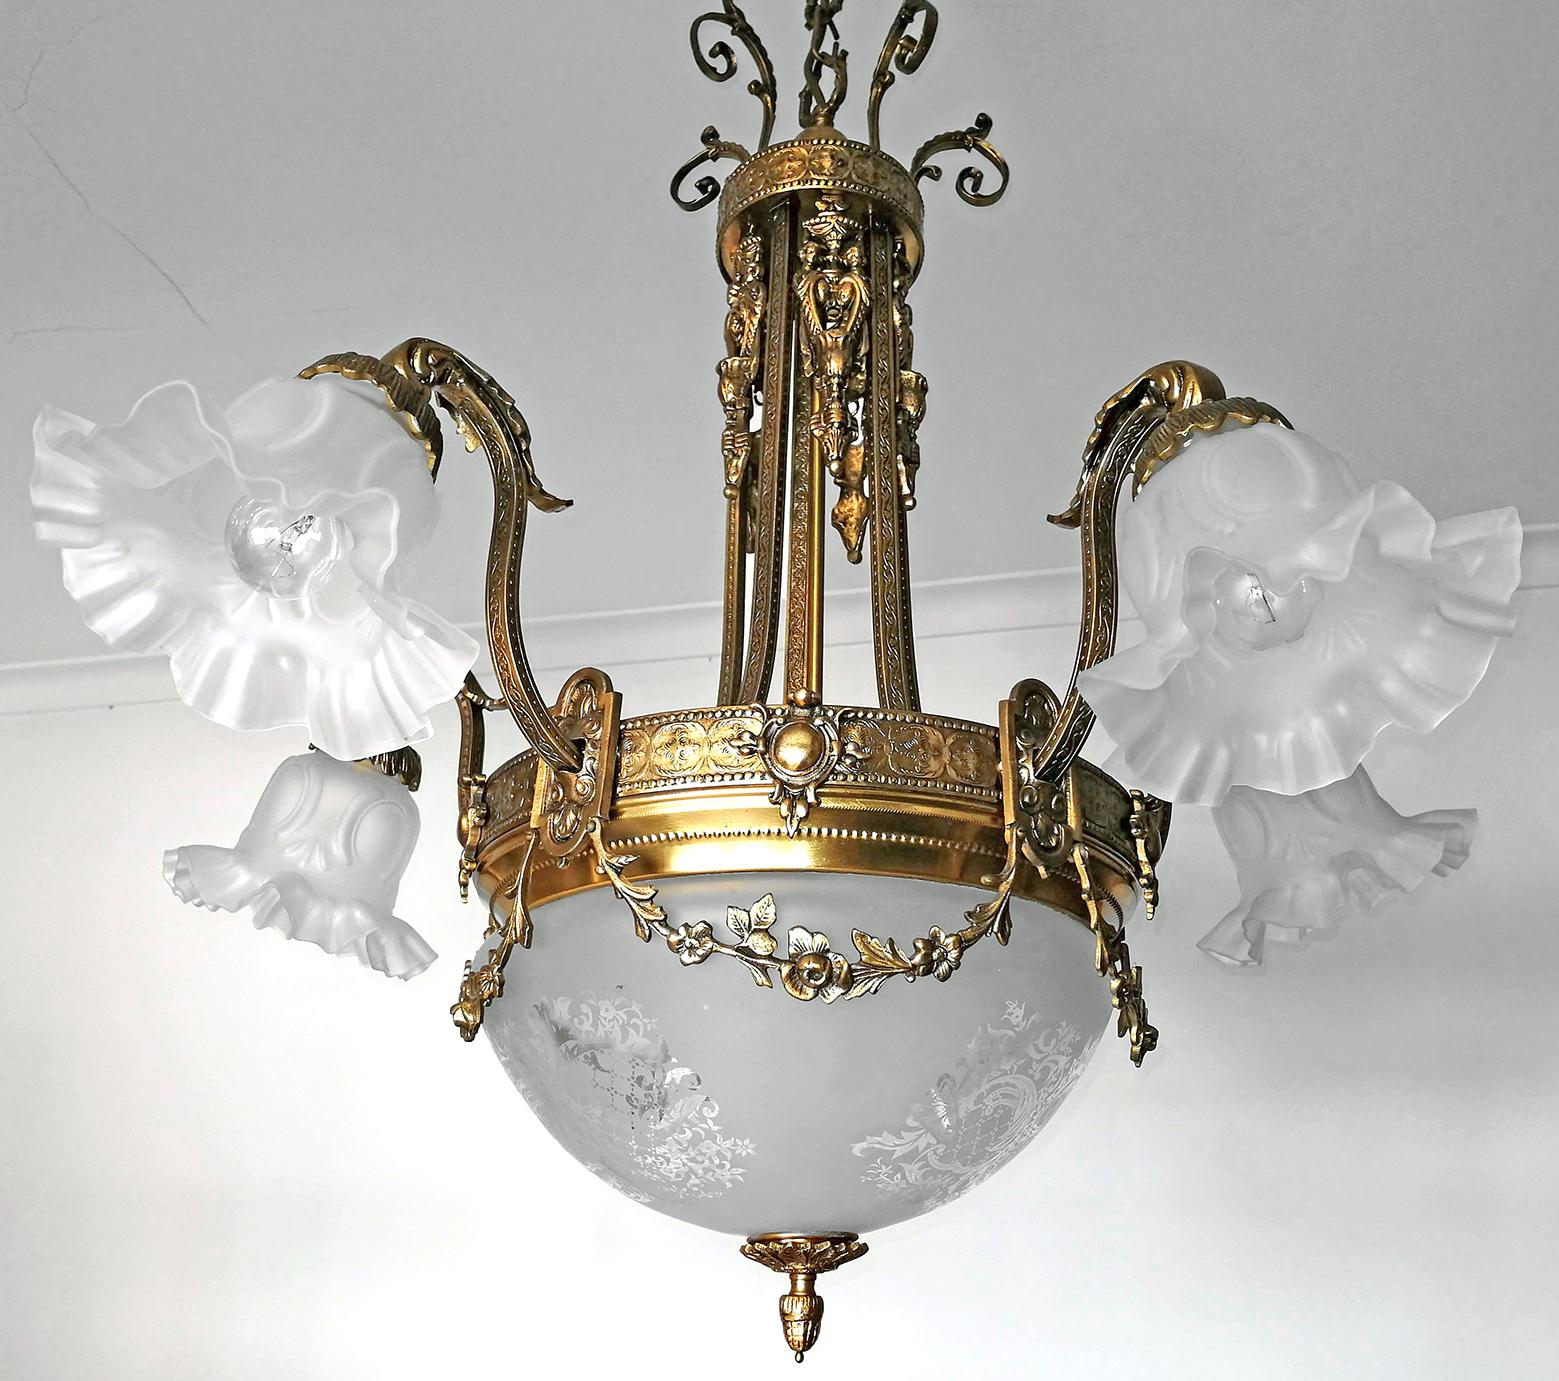 A wonderful gilt bronze and etched-glass 8-light ceiling fixture decorated with fine ornaments and garlands, France, early 20th century.
Measures:
Diameter 31.8 in/ 80 cm
Height 41.5 in (chain 7.9 in)/ 105 cm (chain 20cm)
Weight 33 lb/ 15 Kg
8 light